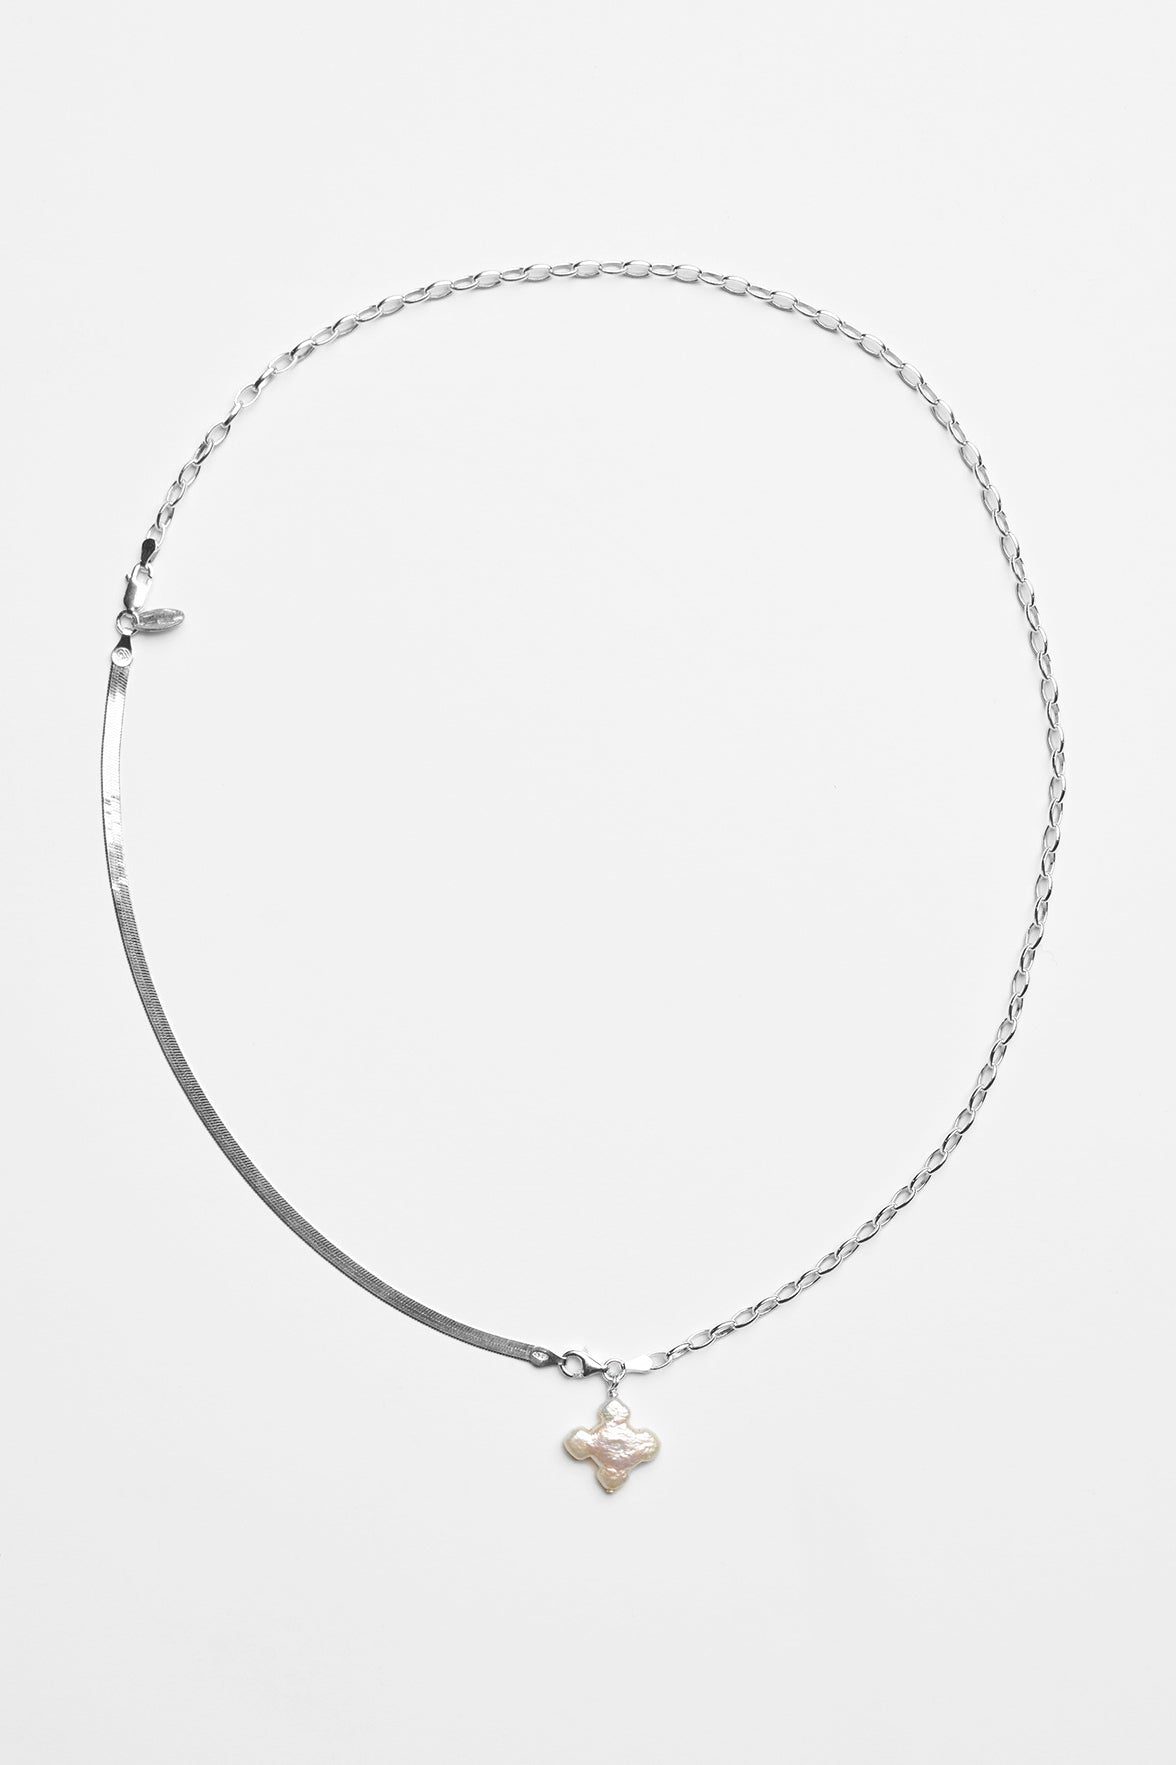 High on Hope Alta Necklace: Pearl Cross by Santangelo